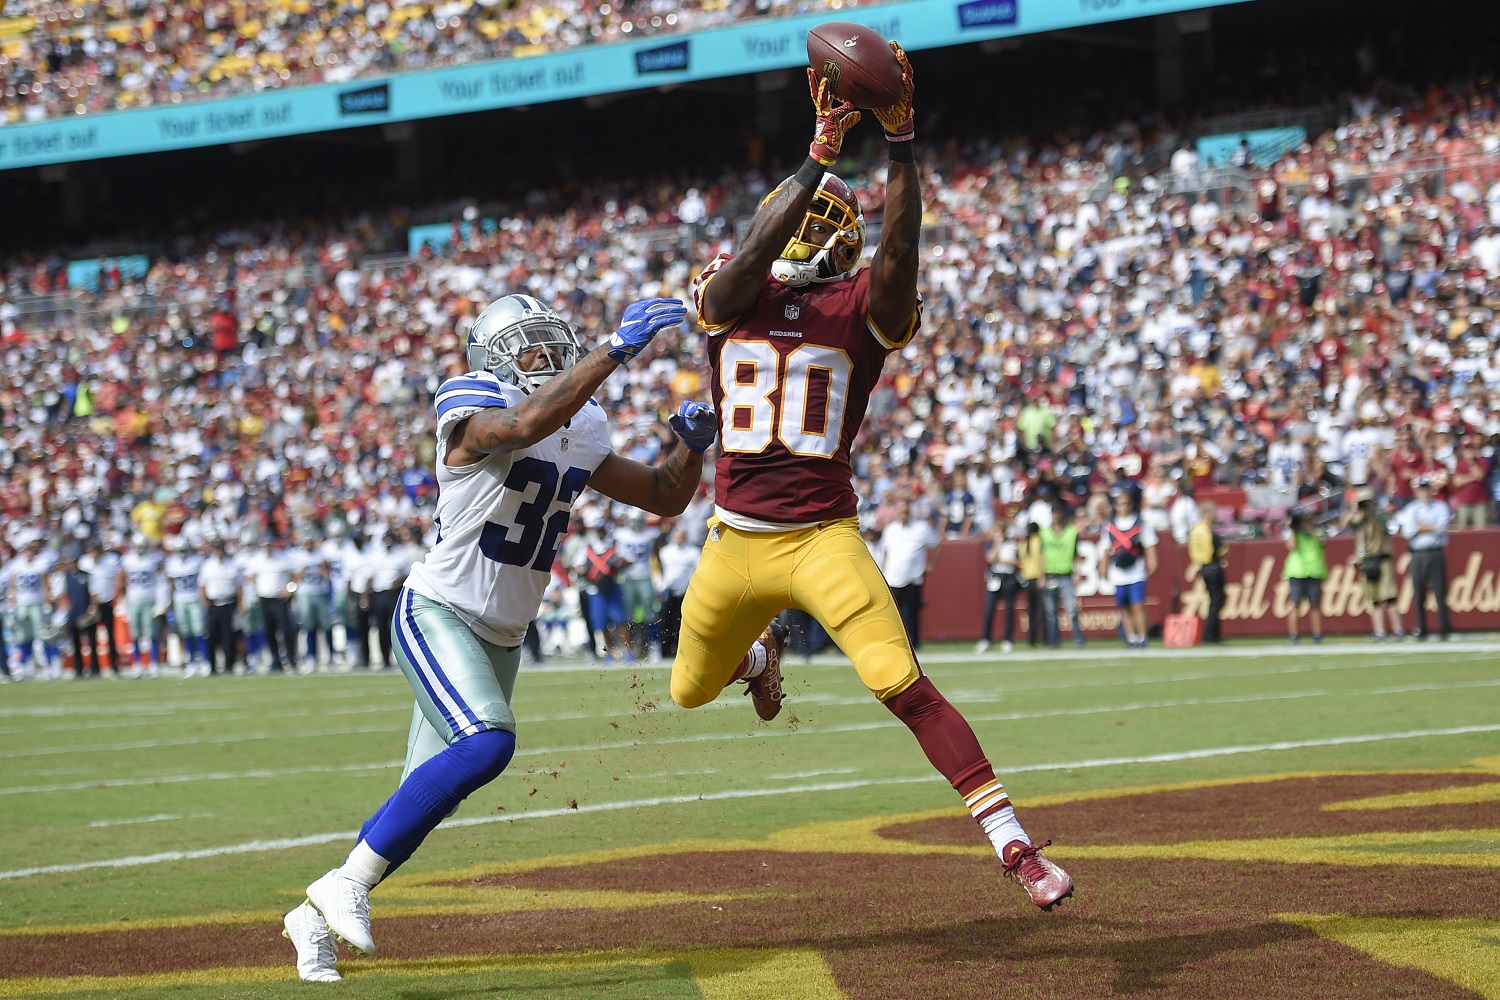 Washington Redskins wide receiver Jamison Crowder (80) pulls in a touchdown pass under pressure from Dallas Cowboys cornerback Orlando Scandrick (32) during the second half of an NFL football game in Landover, Md., Sunday, Sept. 18, 2016. (AP Photo/Nick Wass)